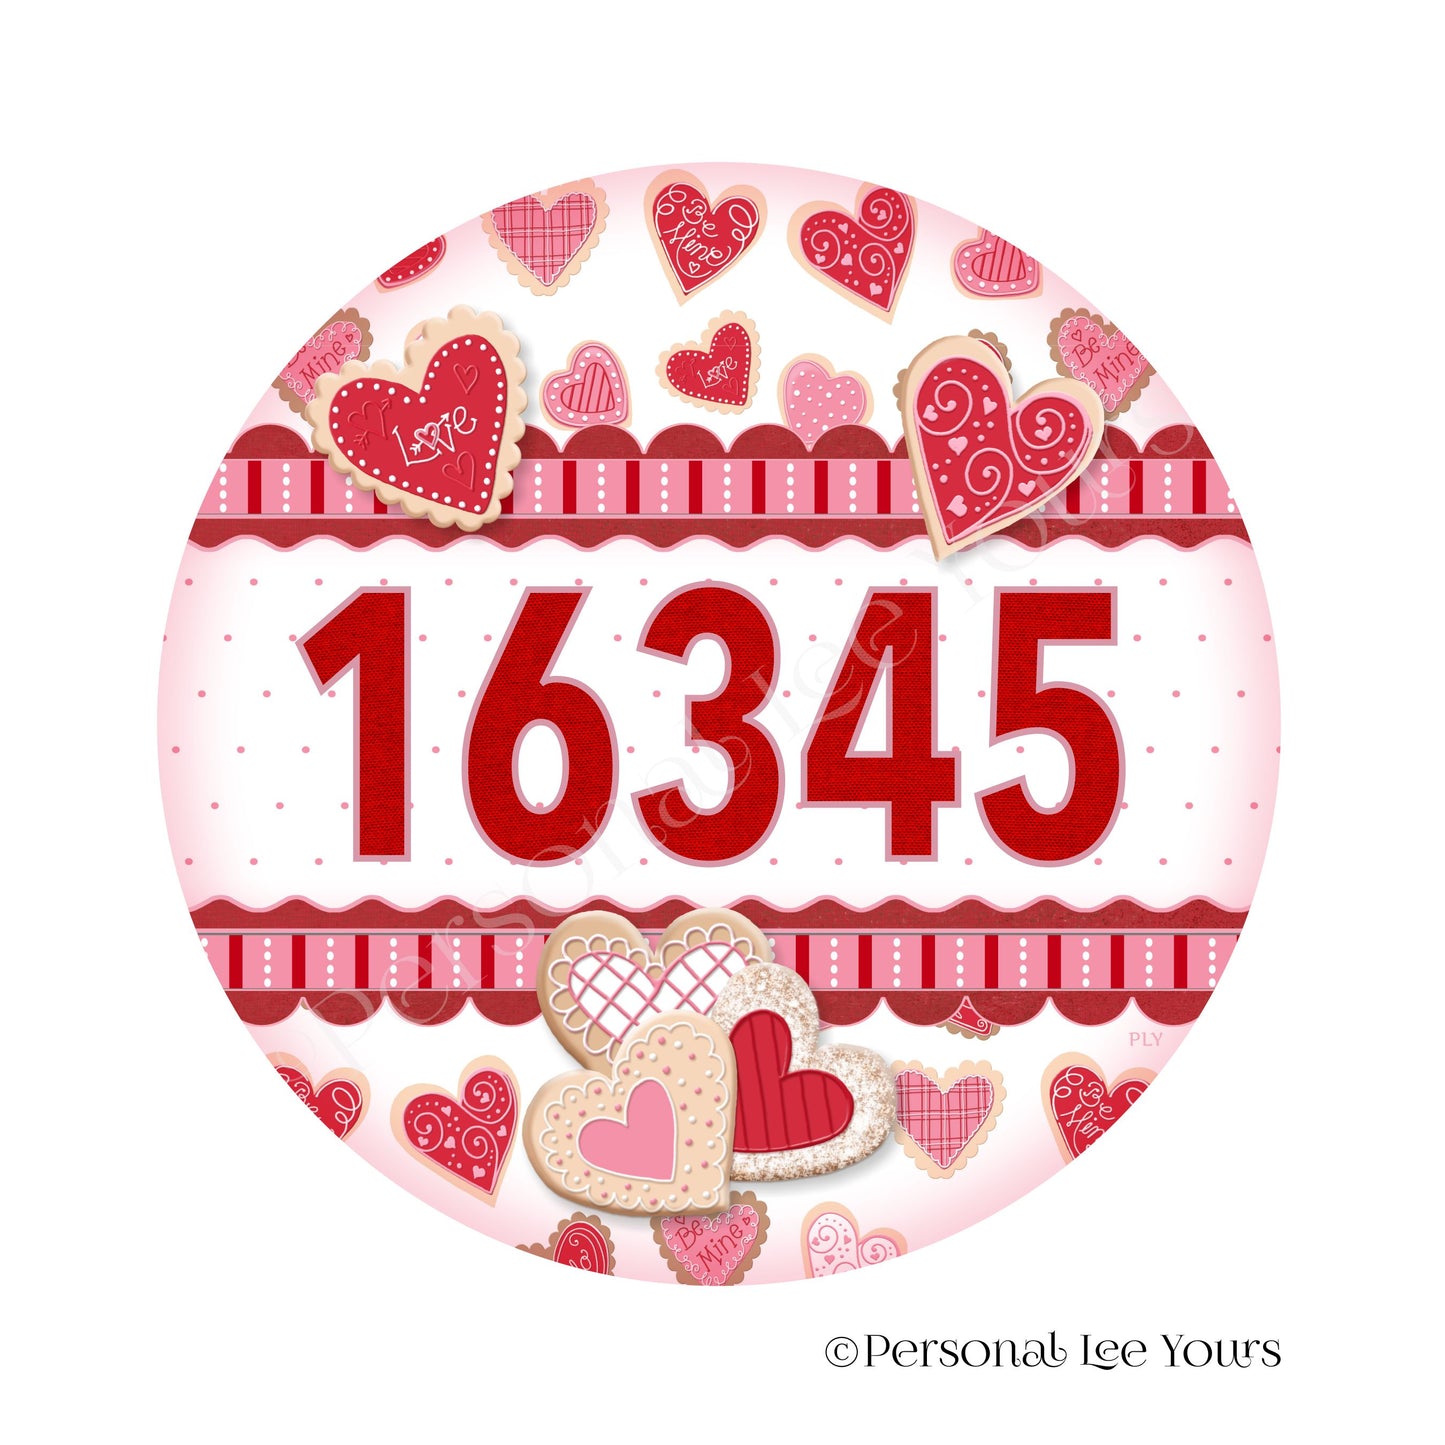 Personalized Wreath Sign * Valentine's Day * Your House Number * Round * Lightweight Metal